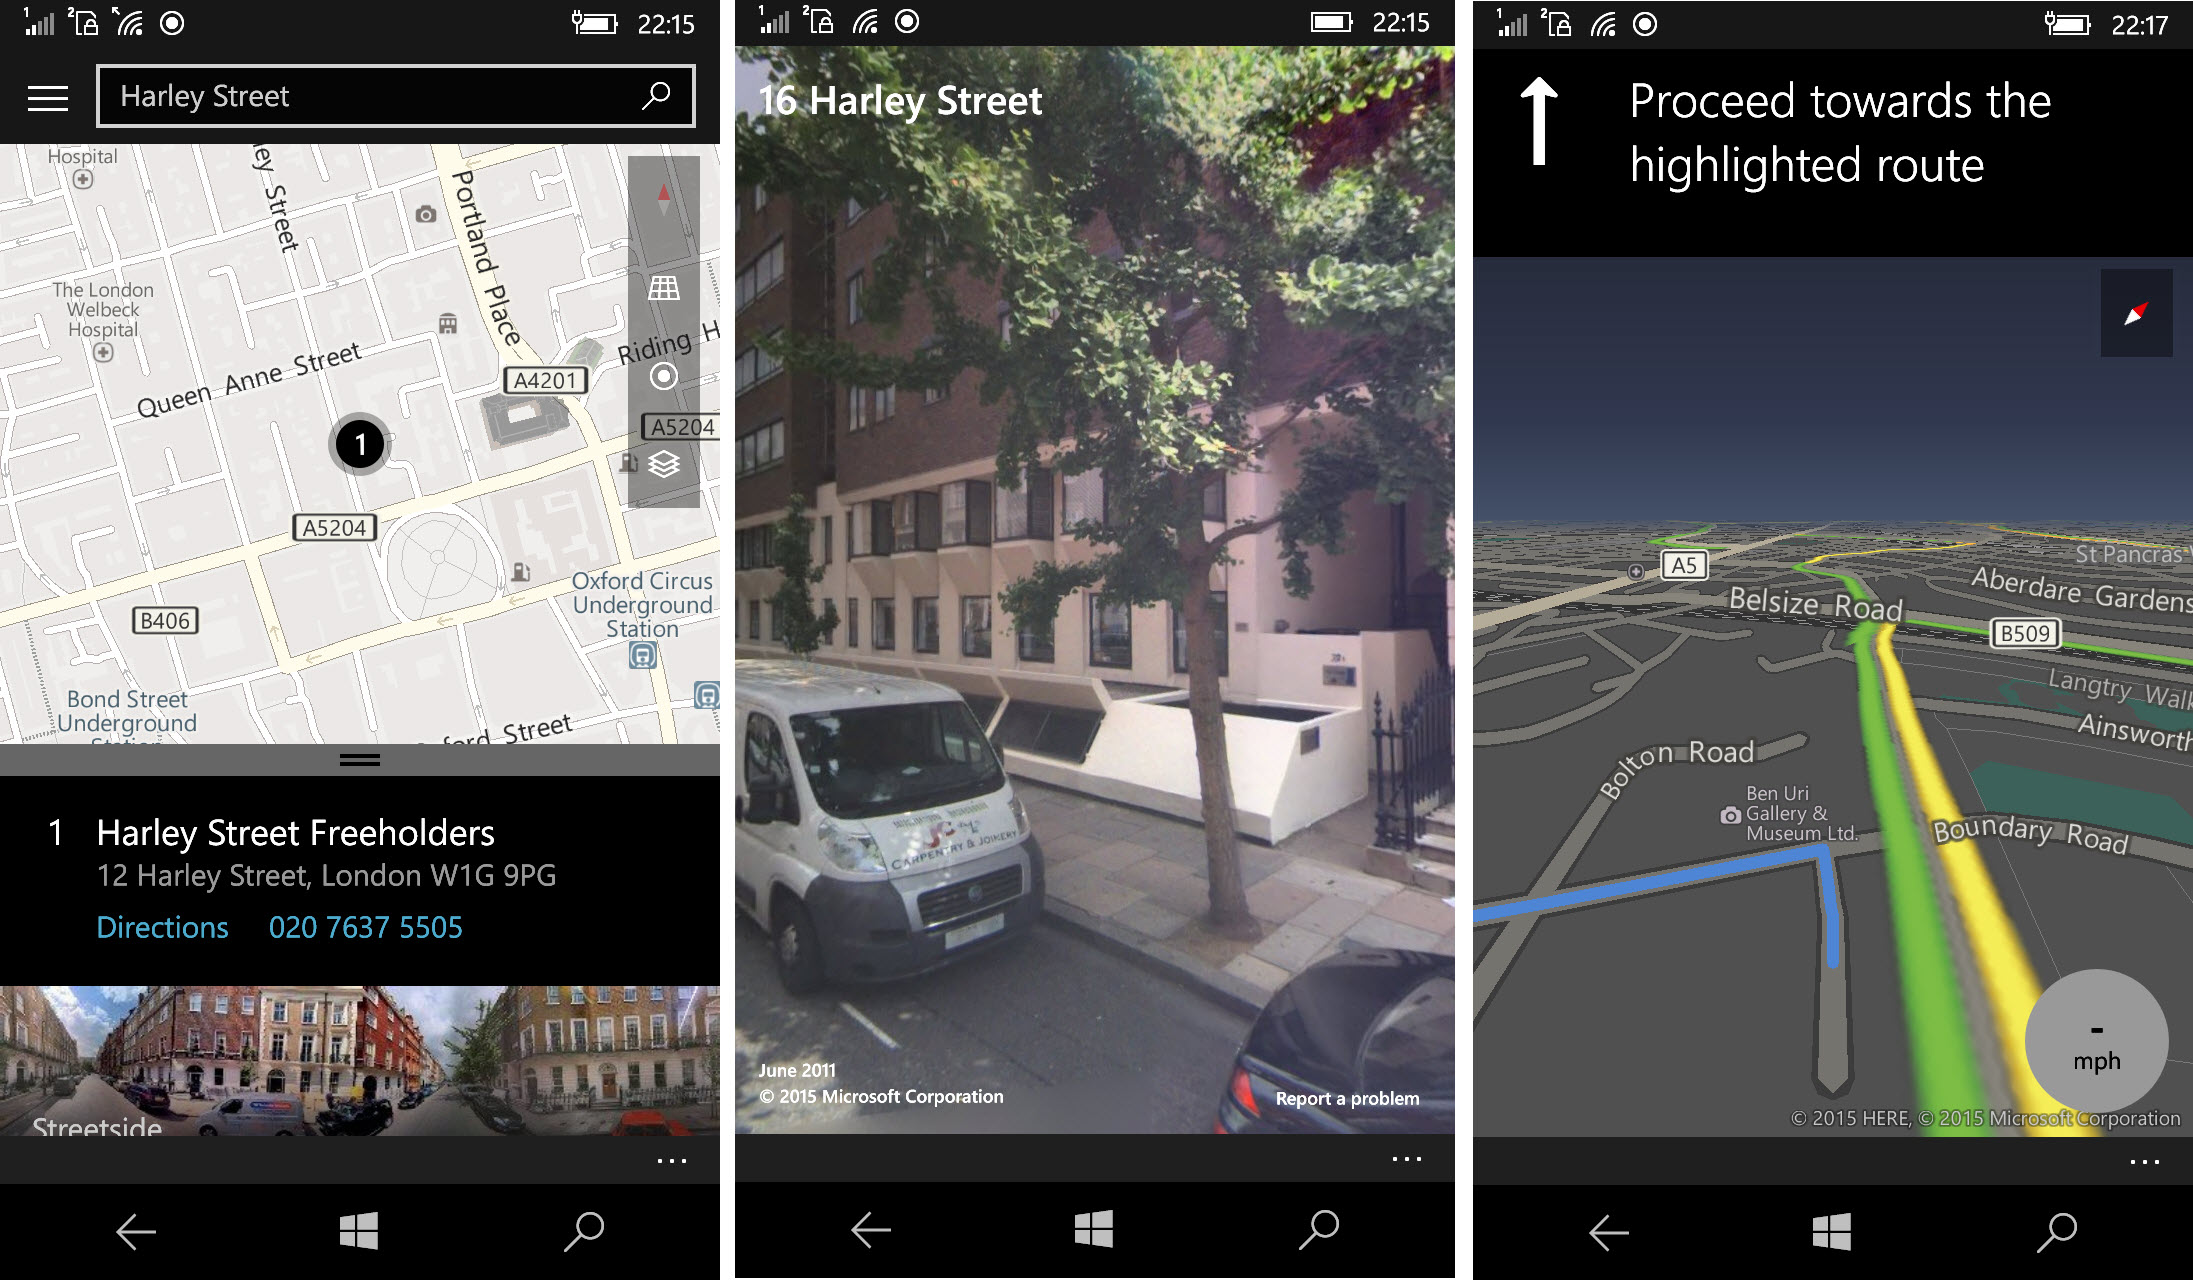 Windows Maps in Windows 10 Mobile (Image Credit: Russell Smith)